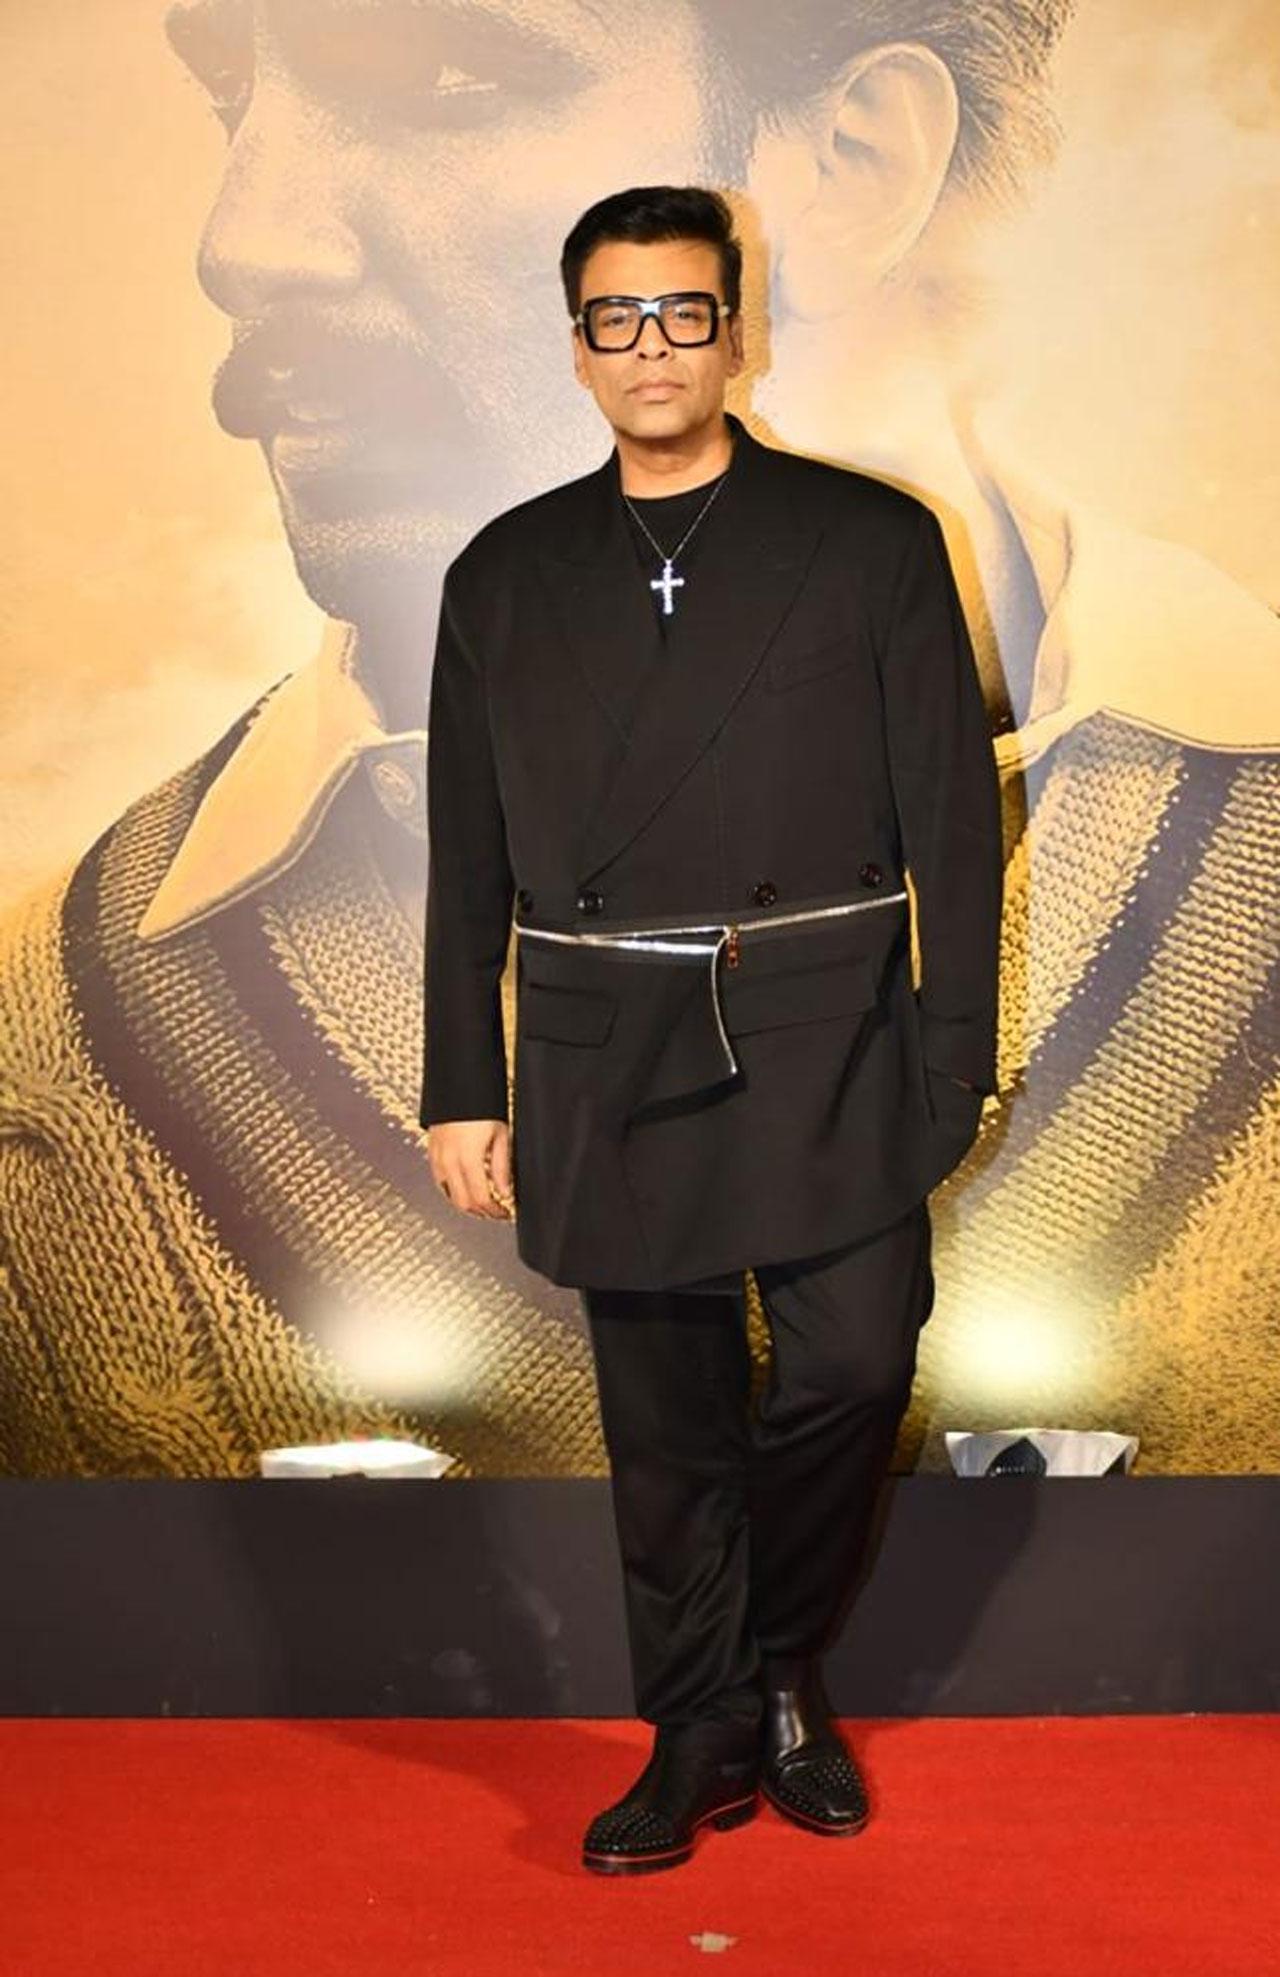 Karan Johar surely knows how to make a statement in black and he does at the screening. He’s directing Ranveer Singh in two films- Rocky Aur Rani Ki Prem Kahani and Takht.